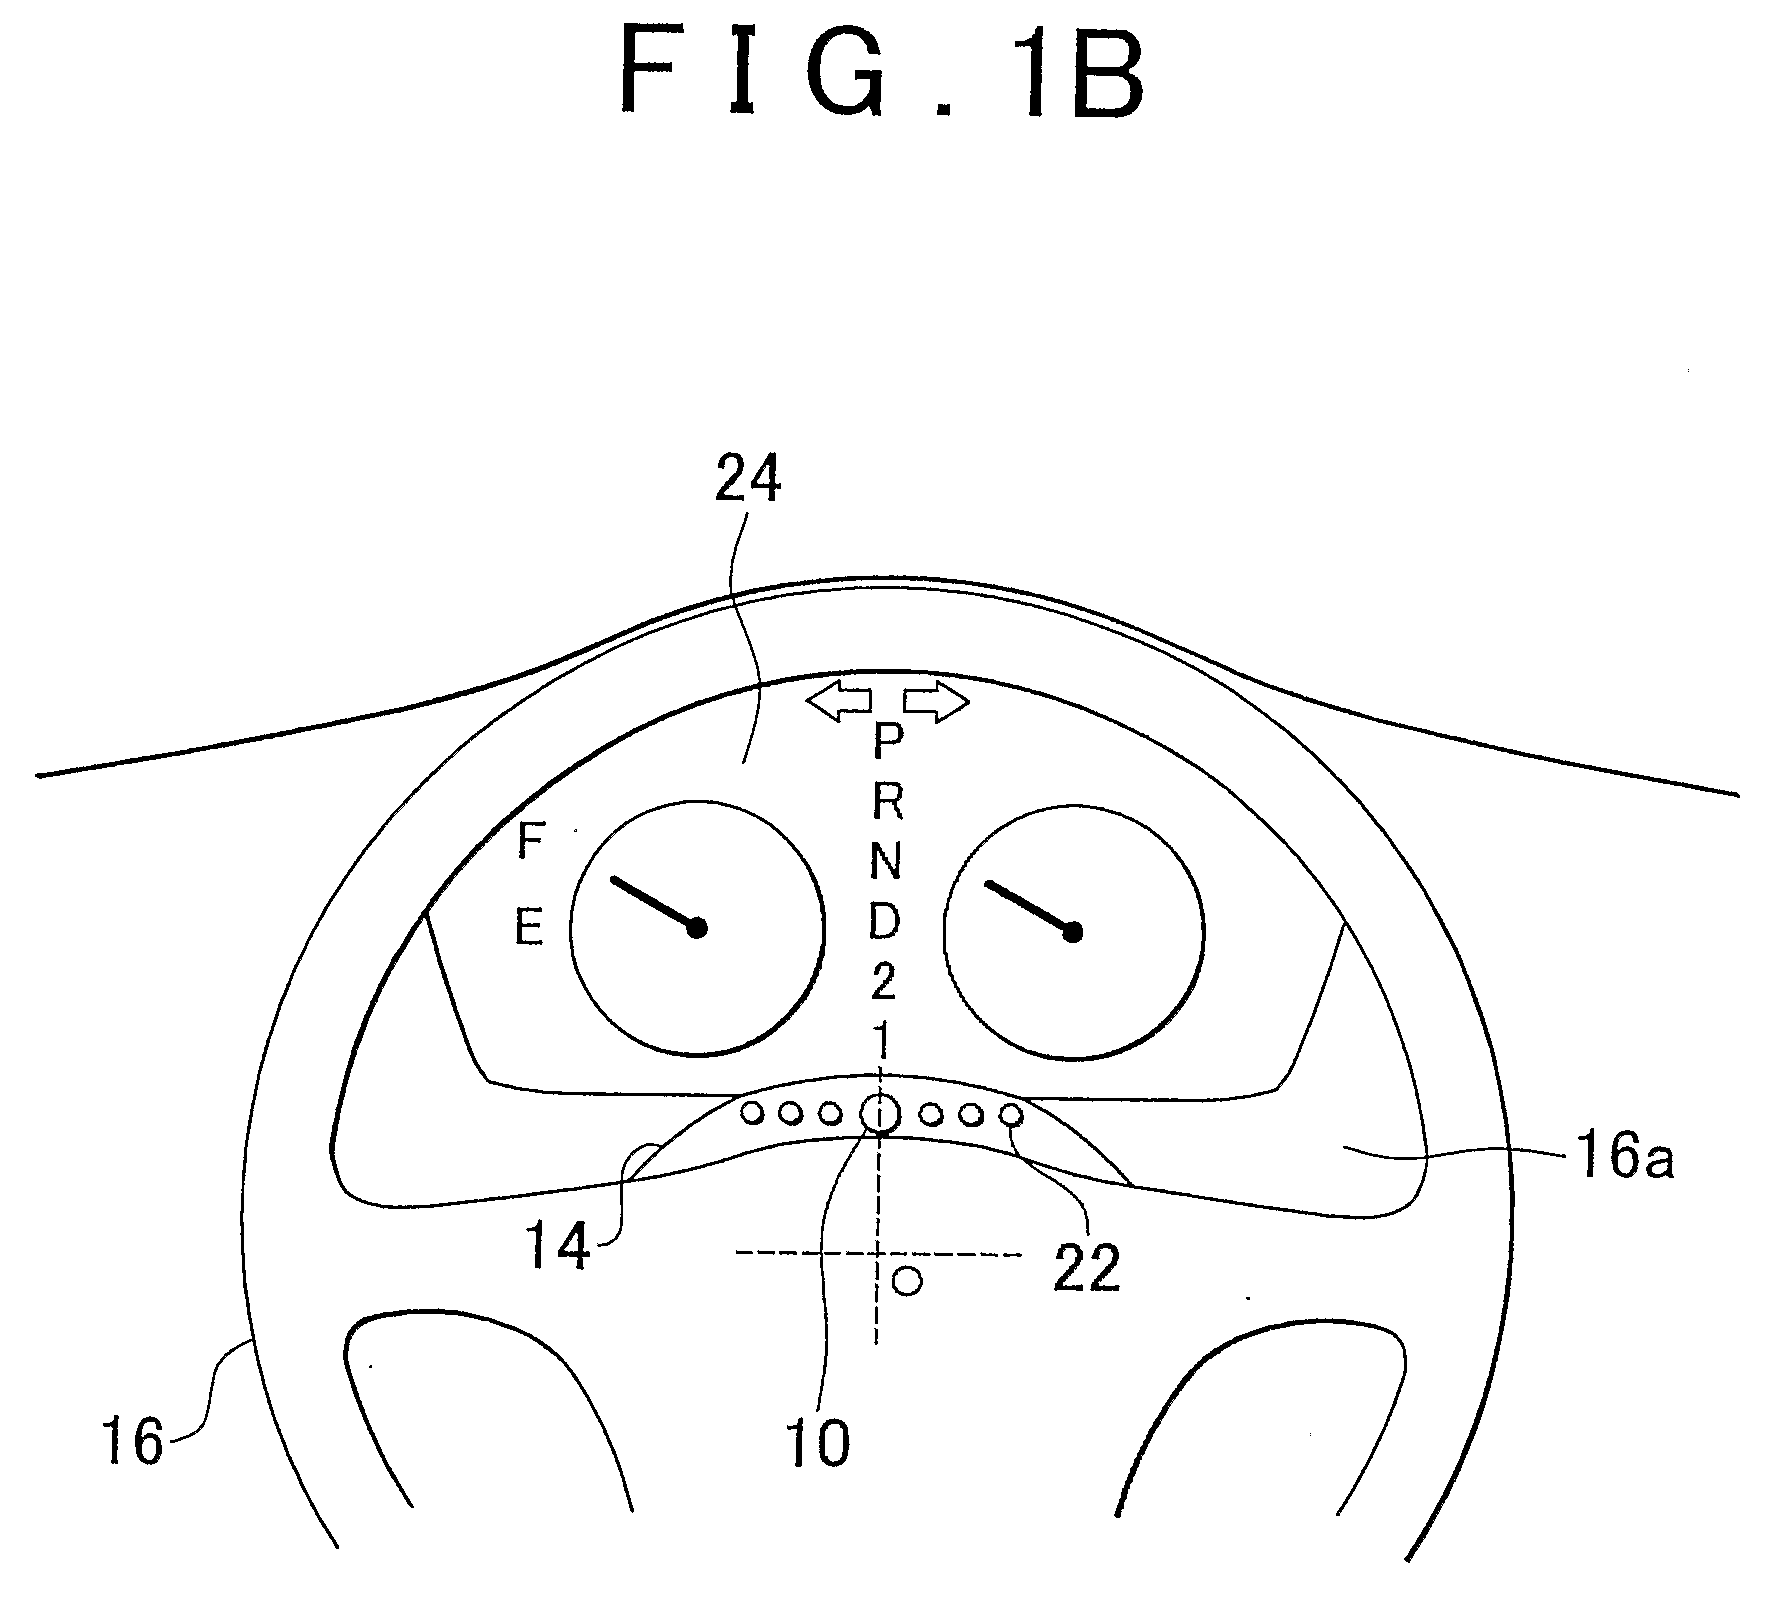 Mounting construction for a facial image photographic camera